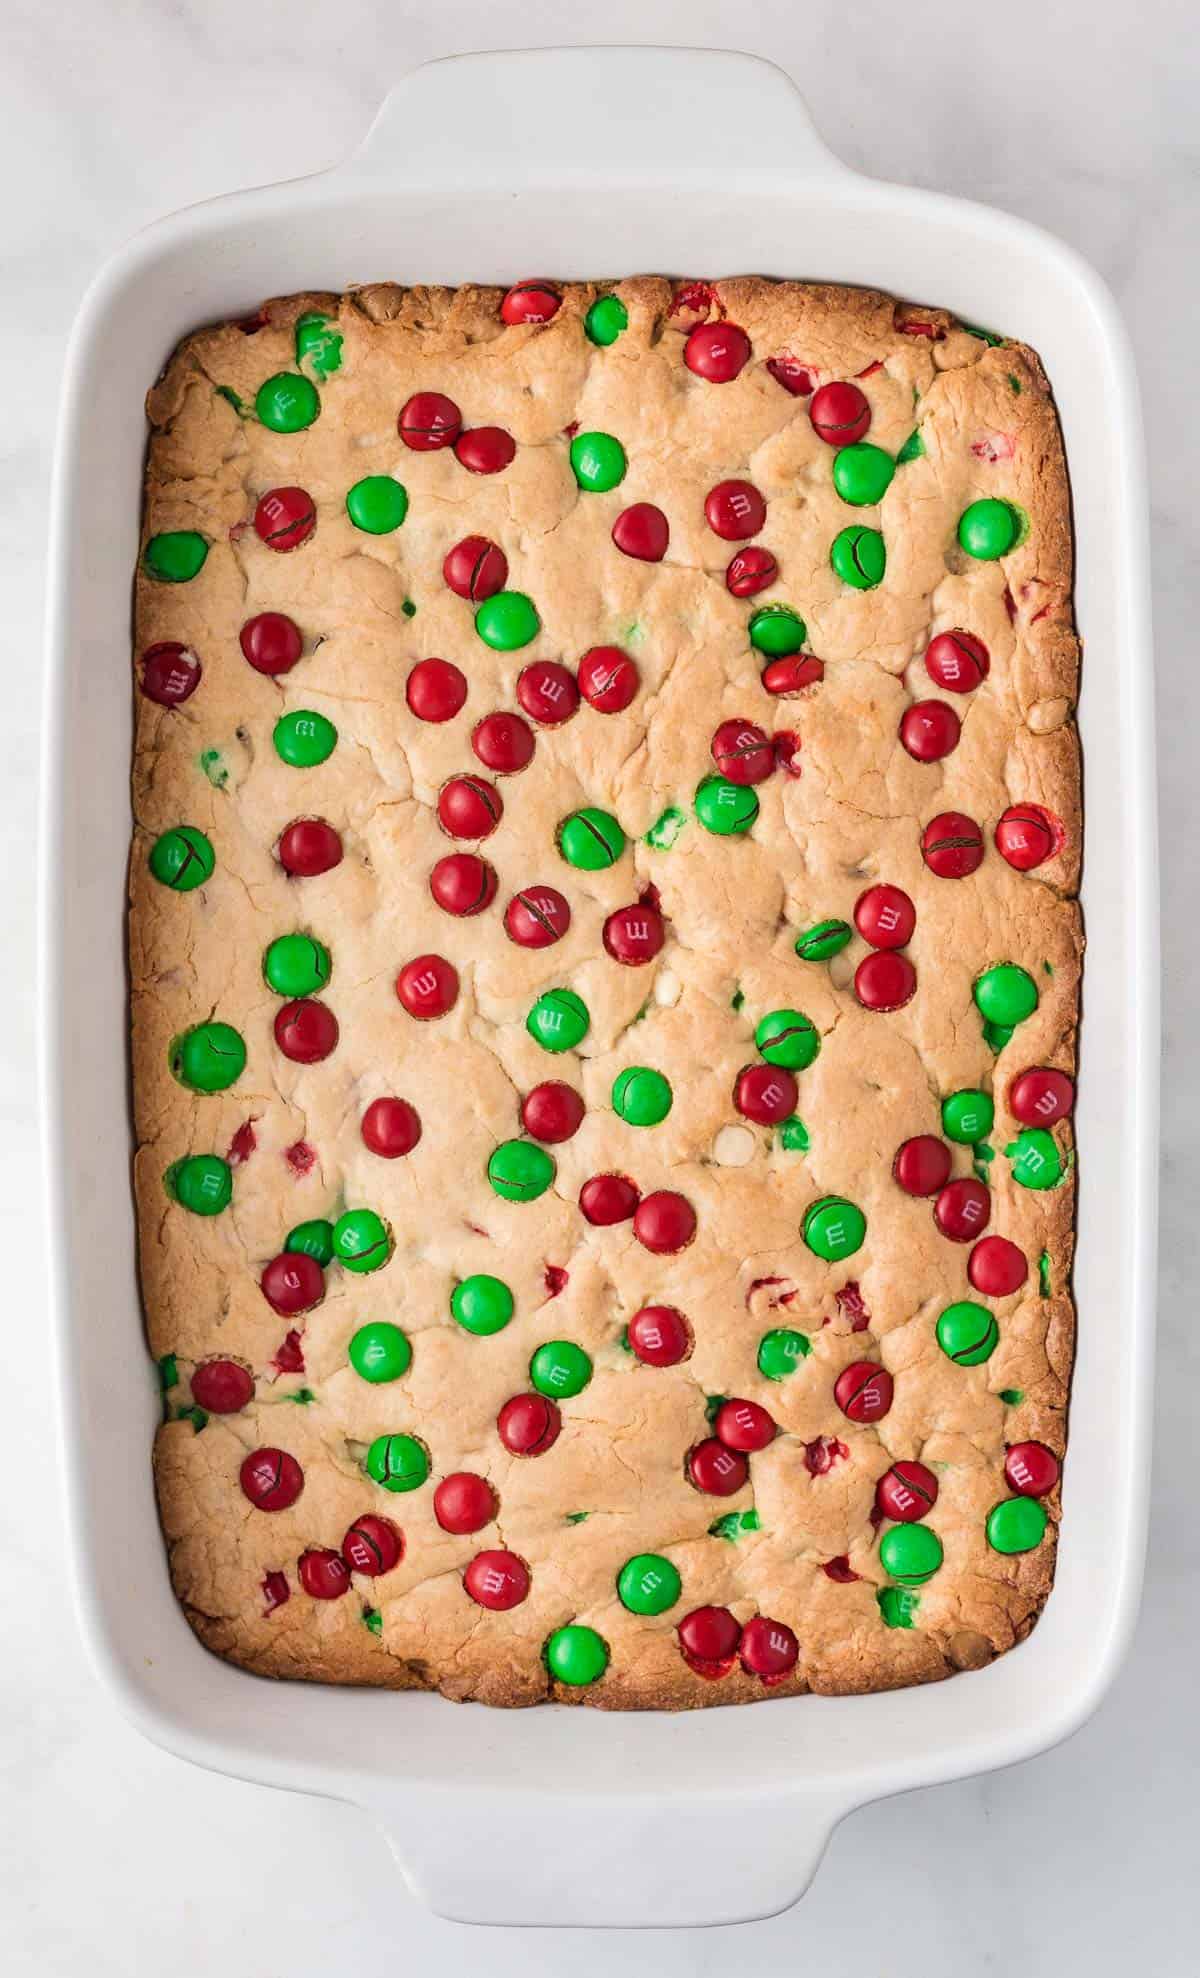 finished baked Christmas cookie bars in the pan